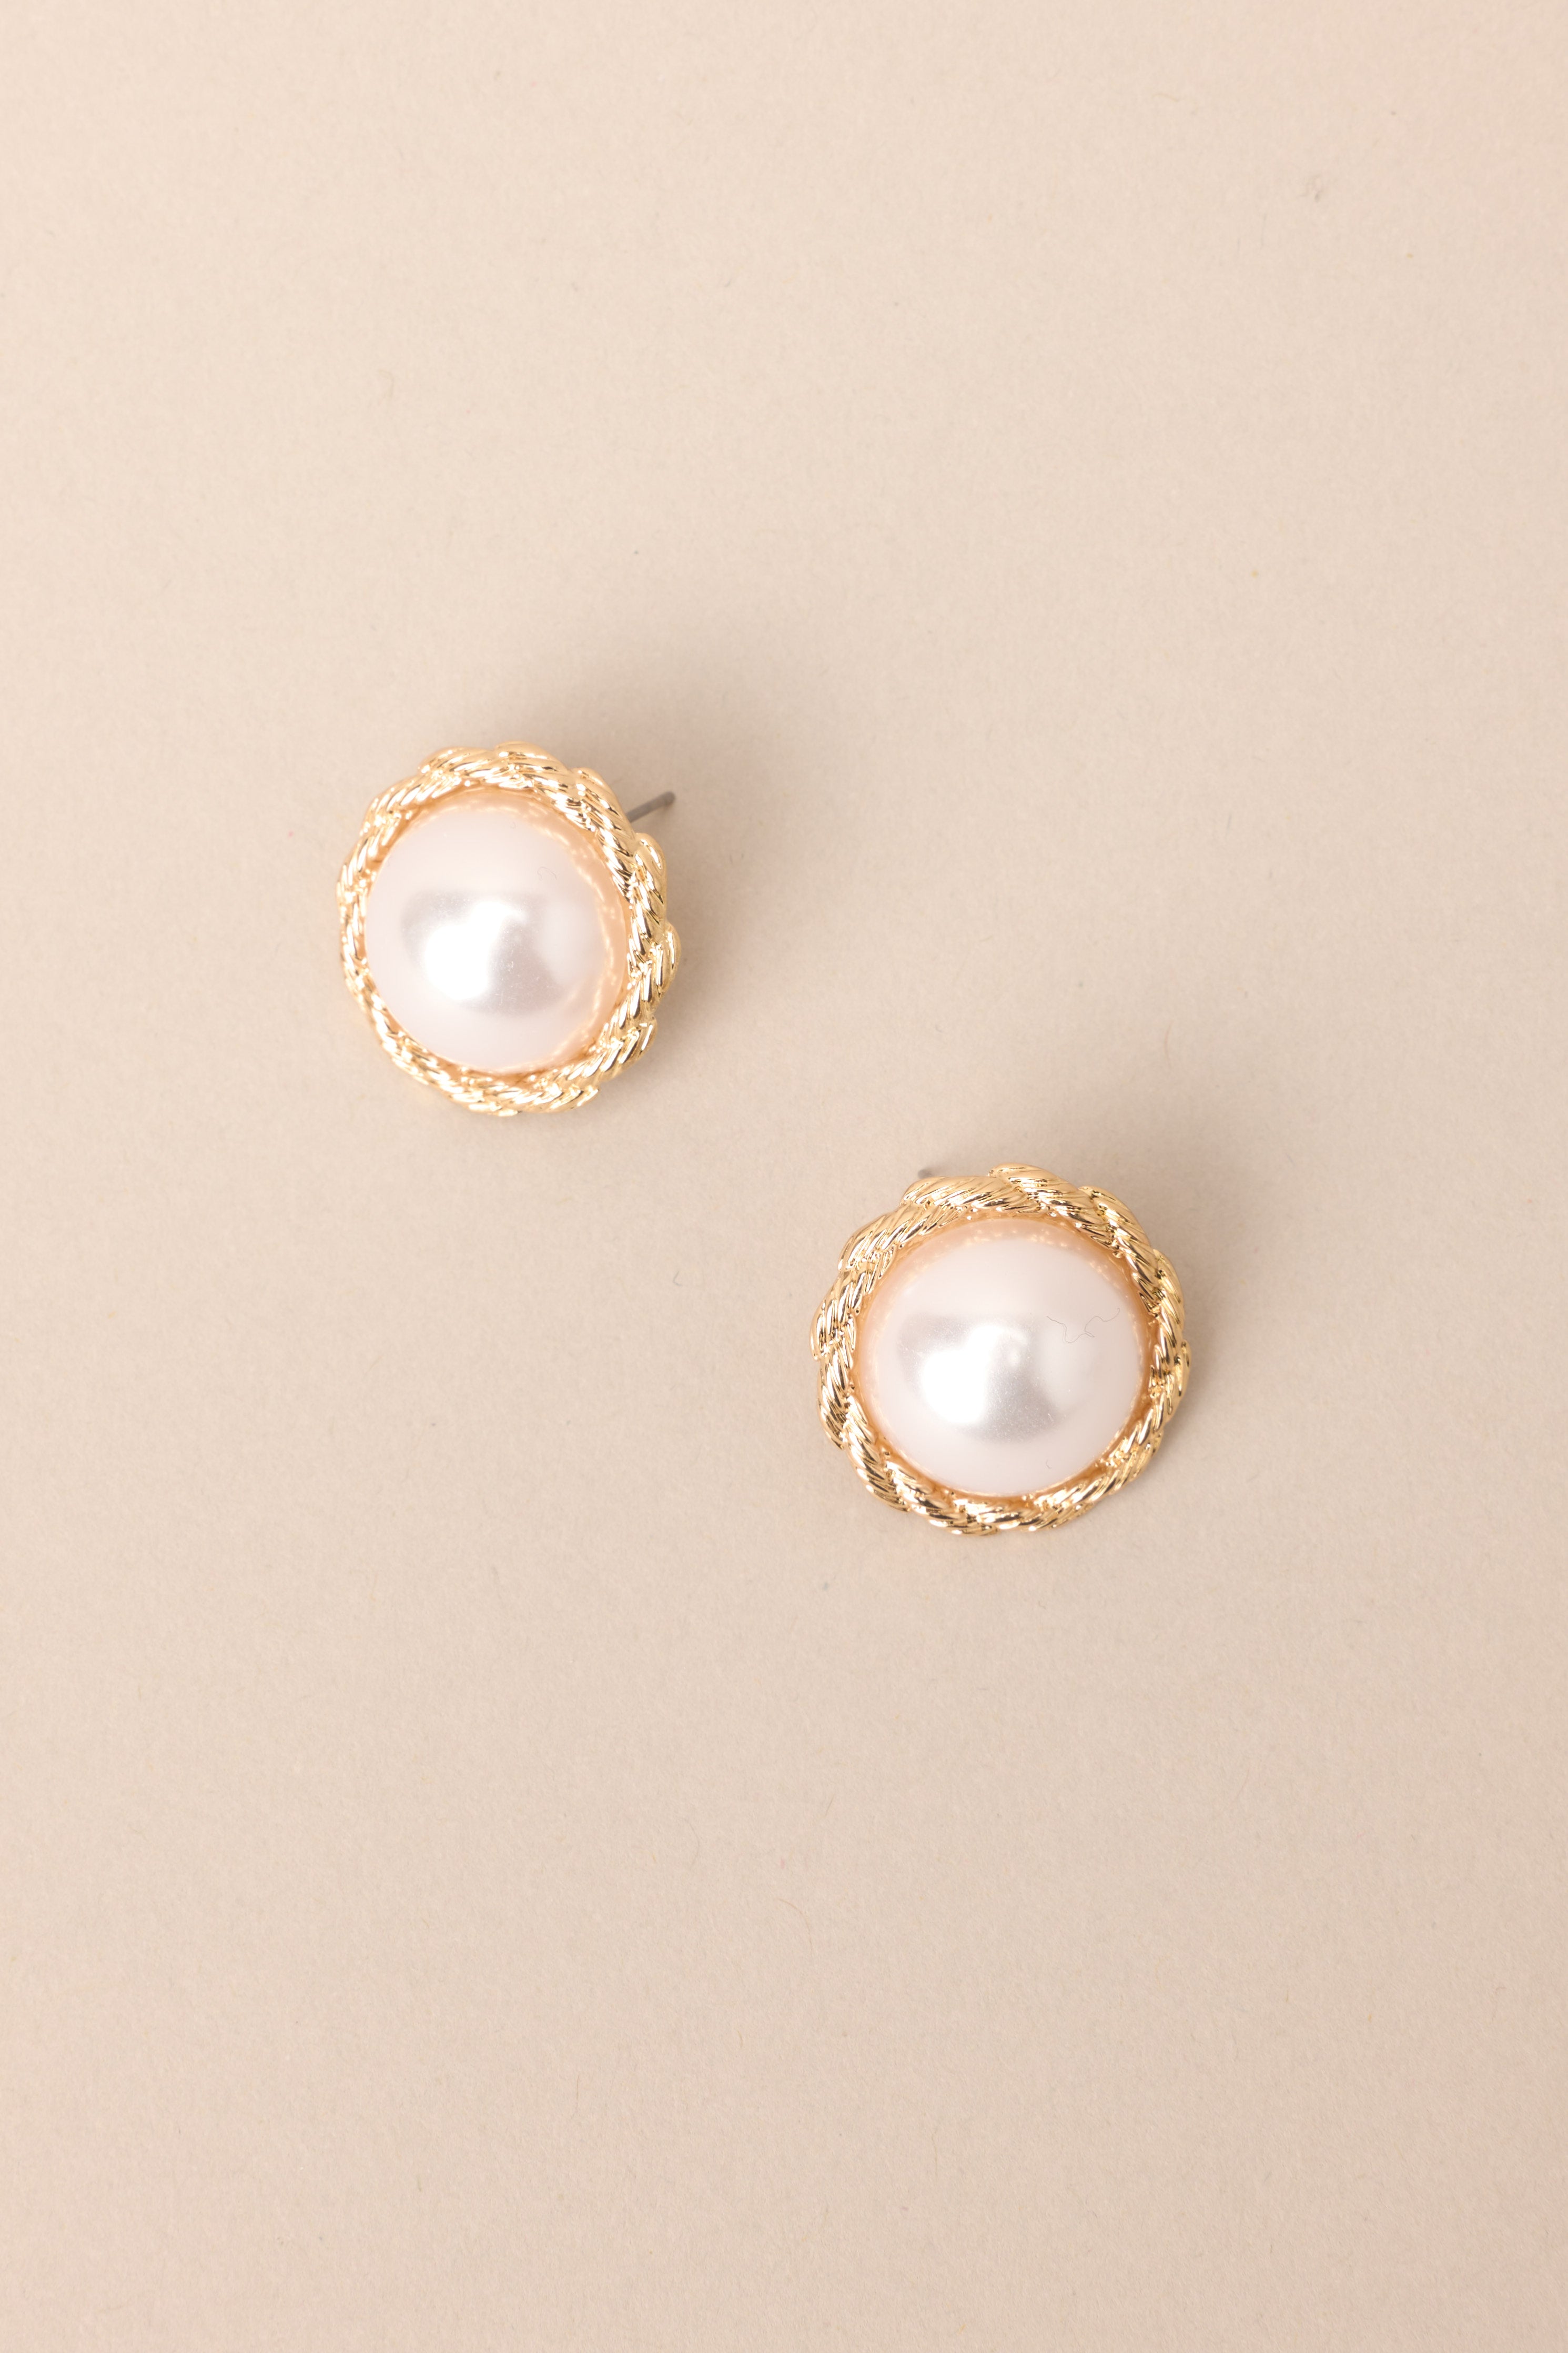 Top view of these earrings that feature a gold twisted rope-like design around a large faux pearl and a secure post backing.